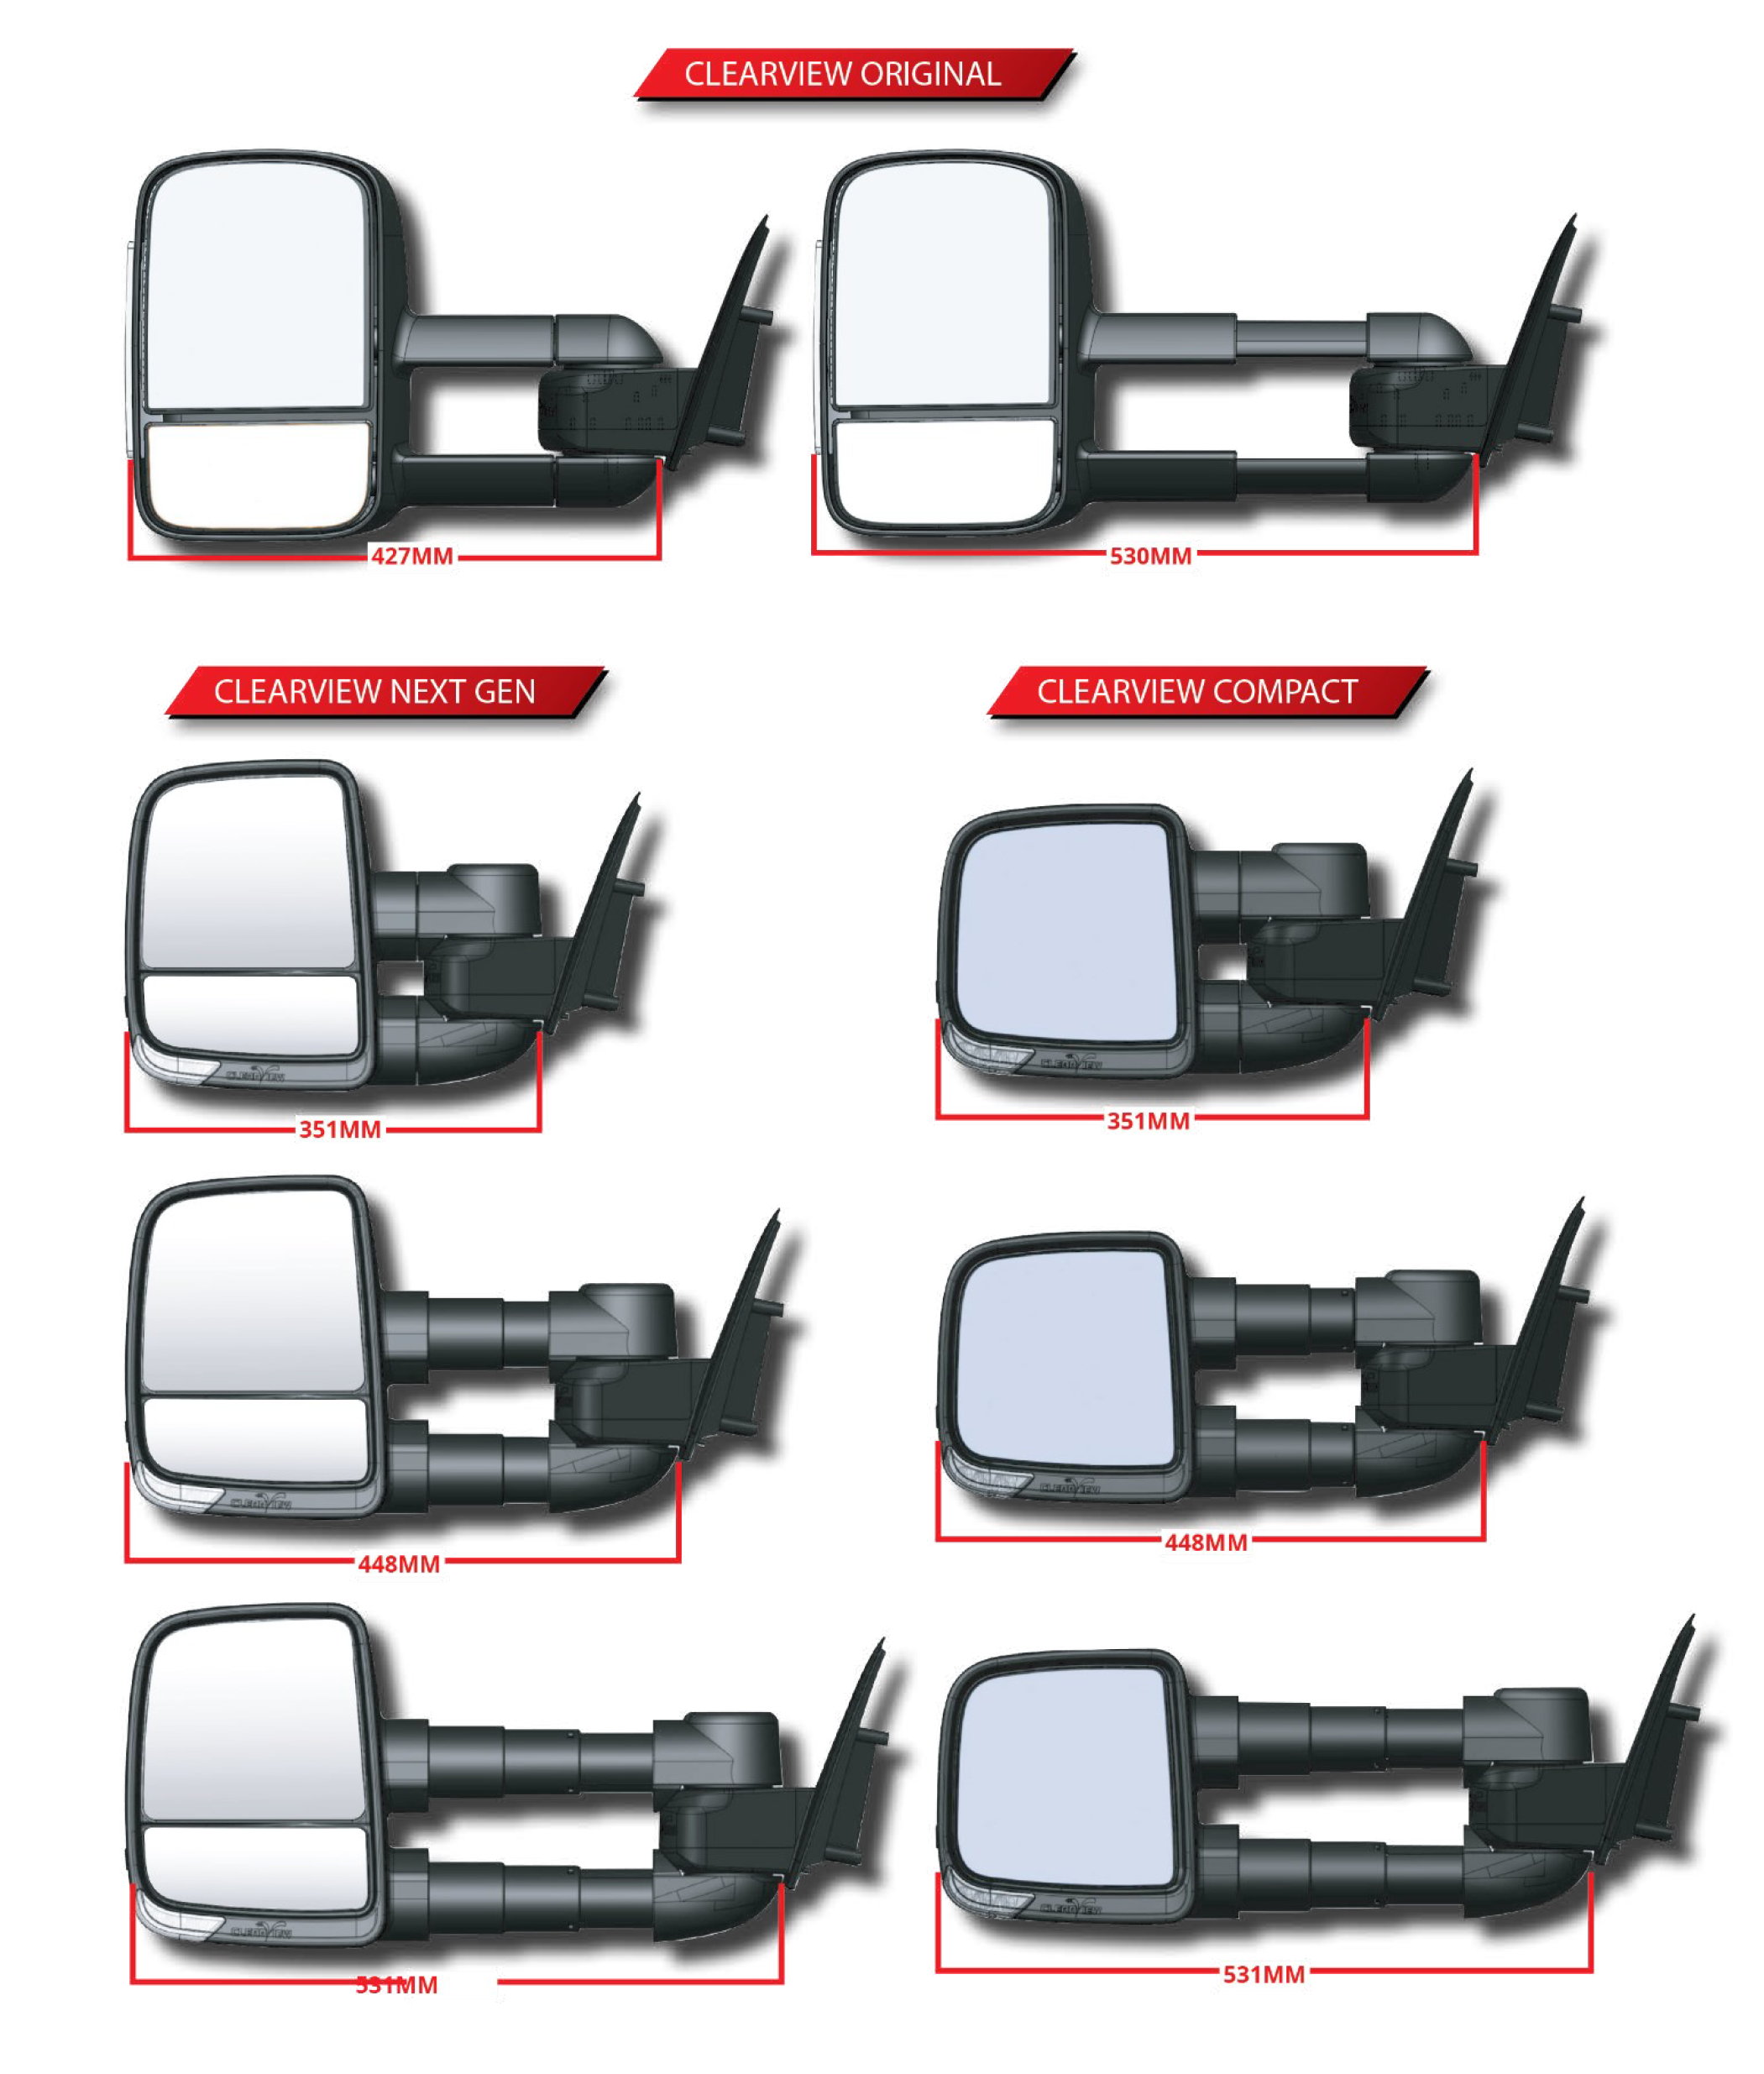 Ford Ranger (2012-2022) PX, PXII, PXIII Clearview Towing Mirrors